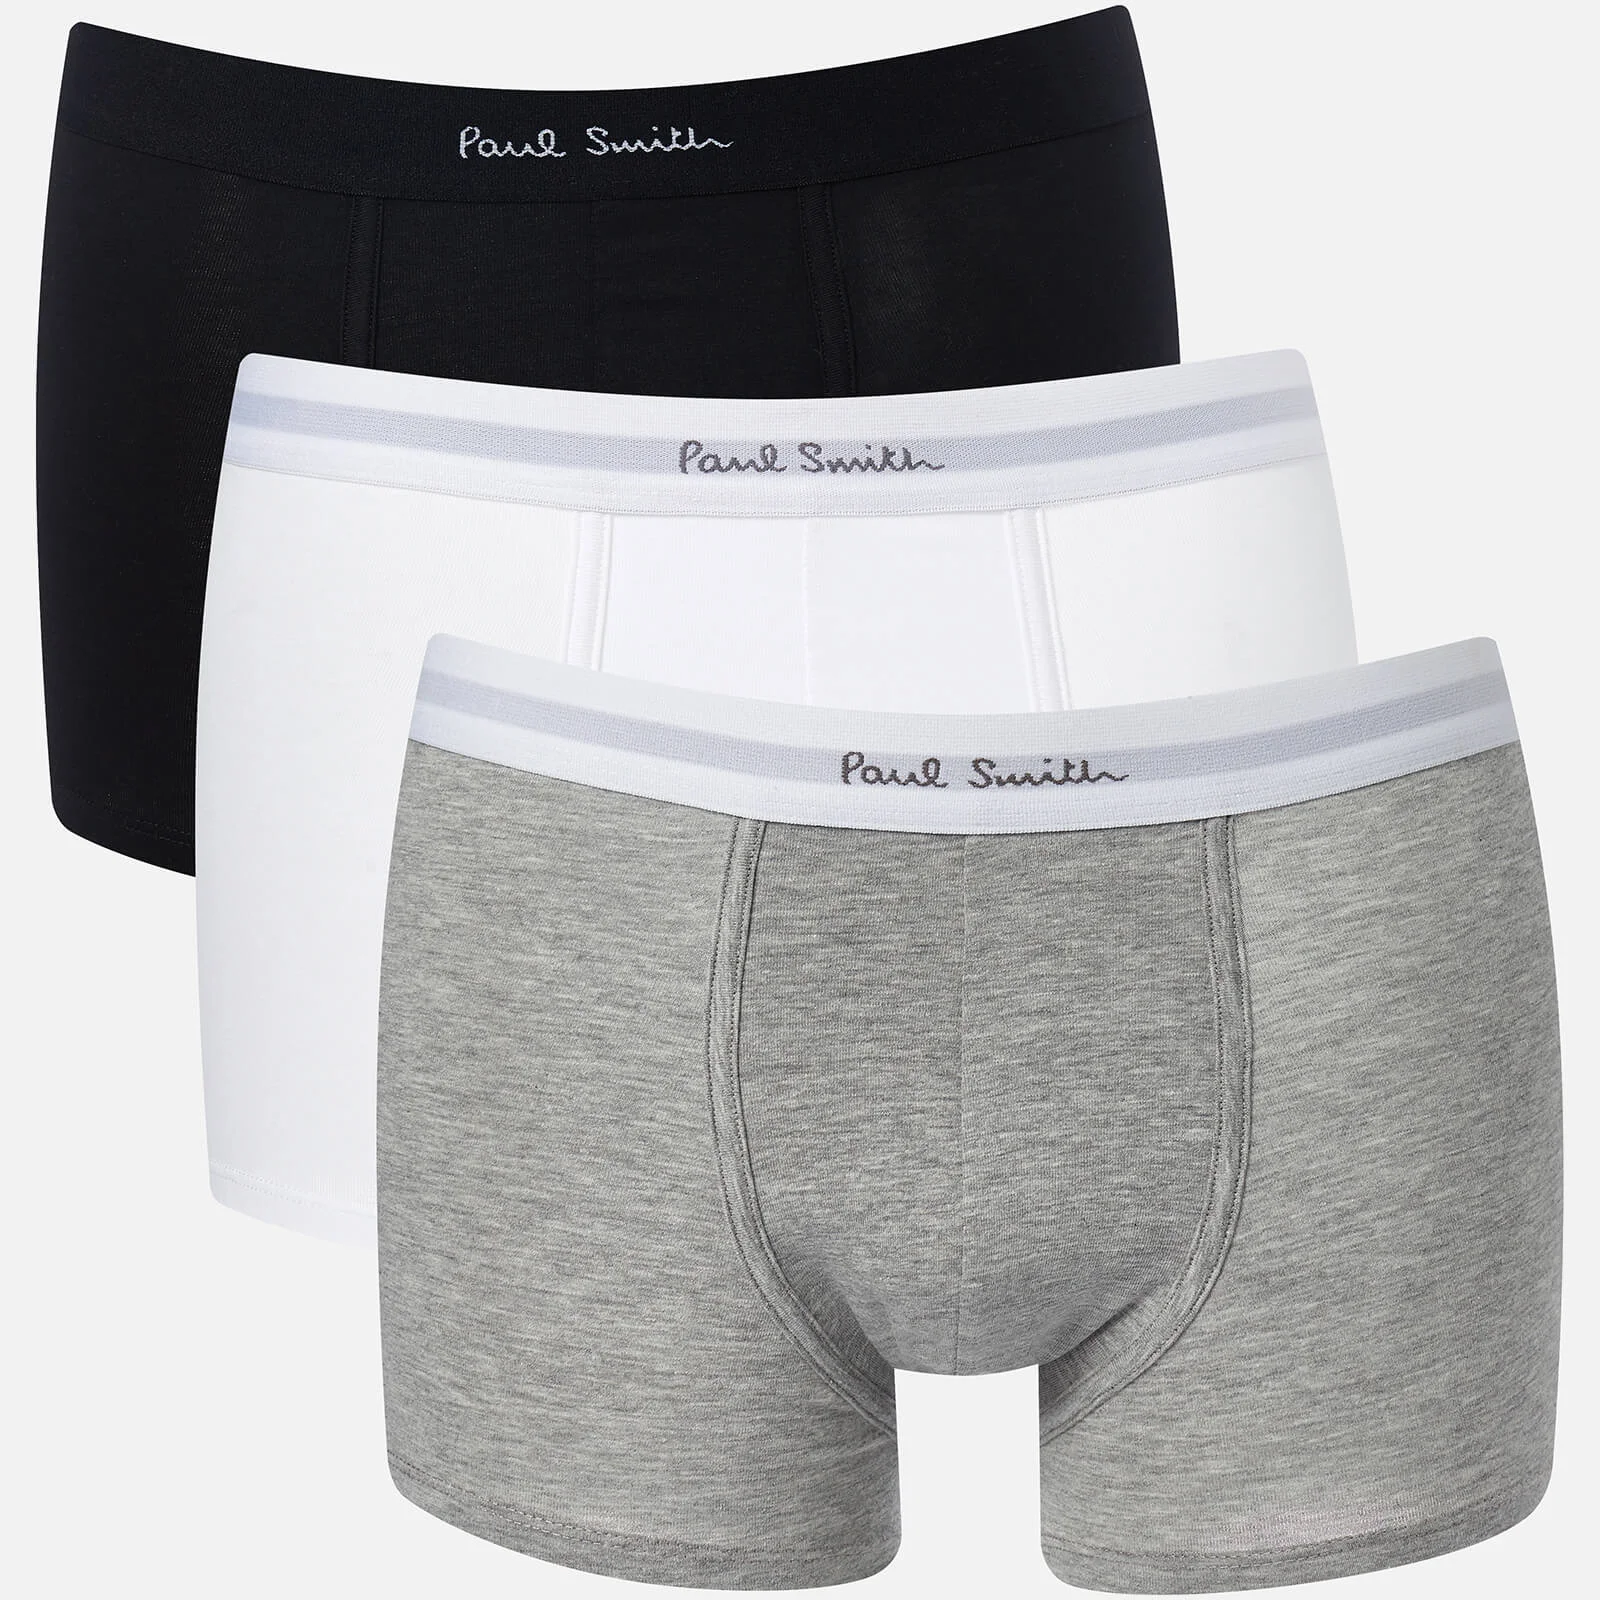 Paul Smith Accessories Men's Three Pack Trunk Boxer Shorts - Multi Image 1